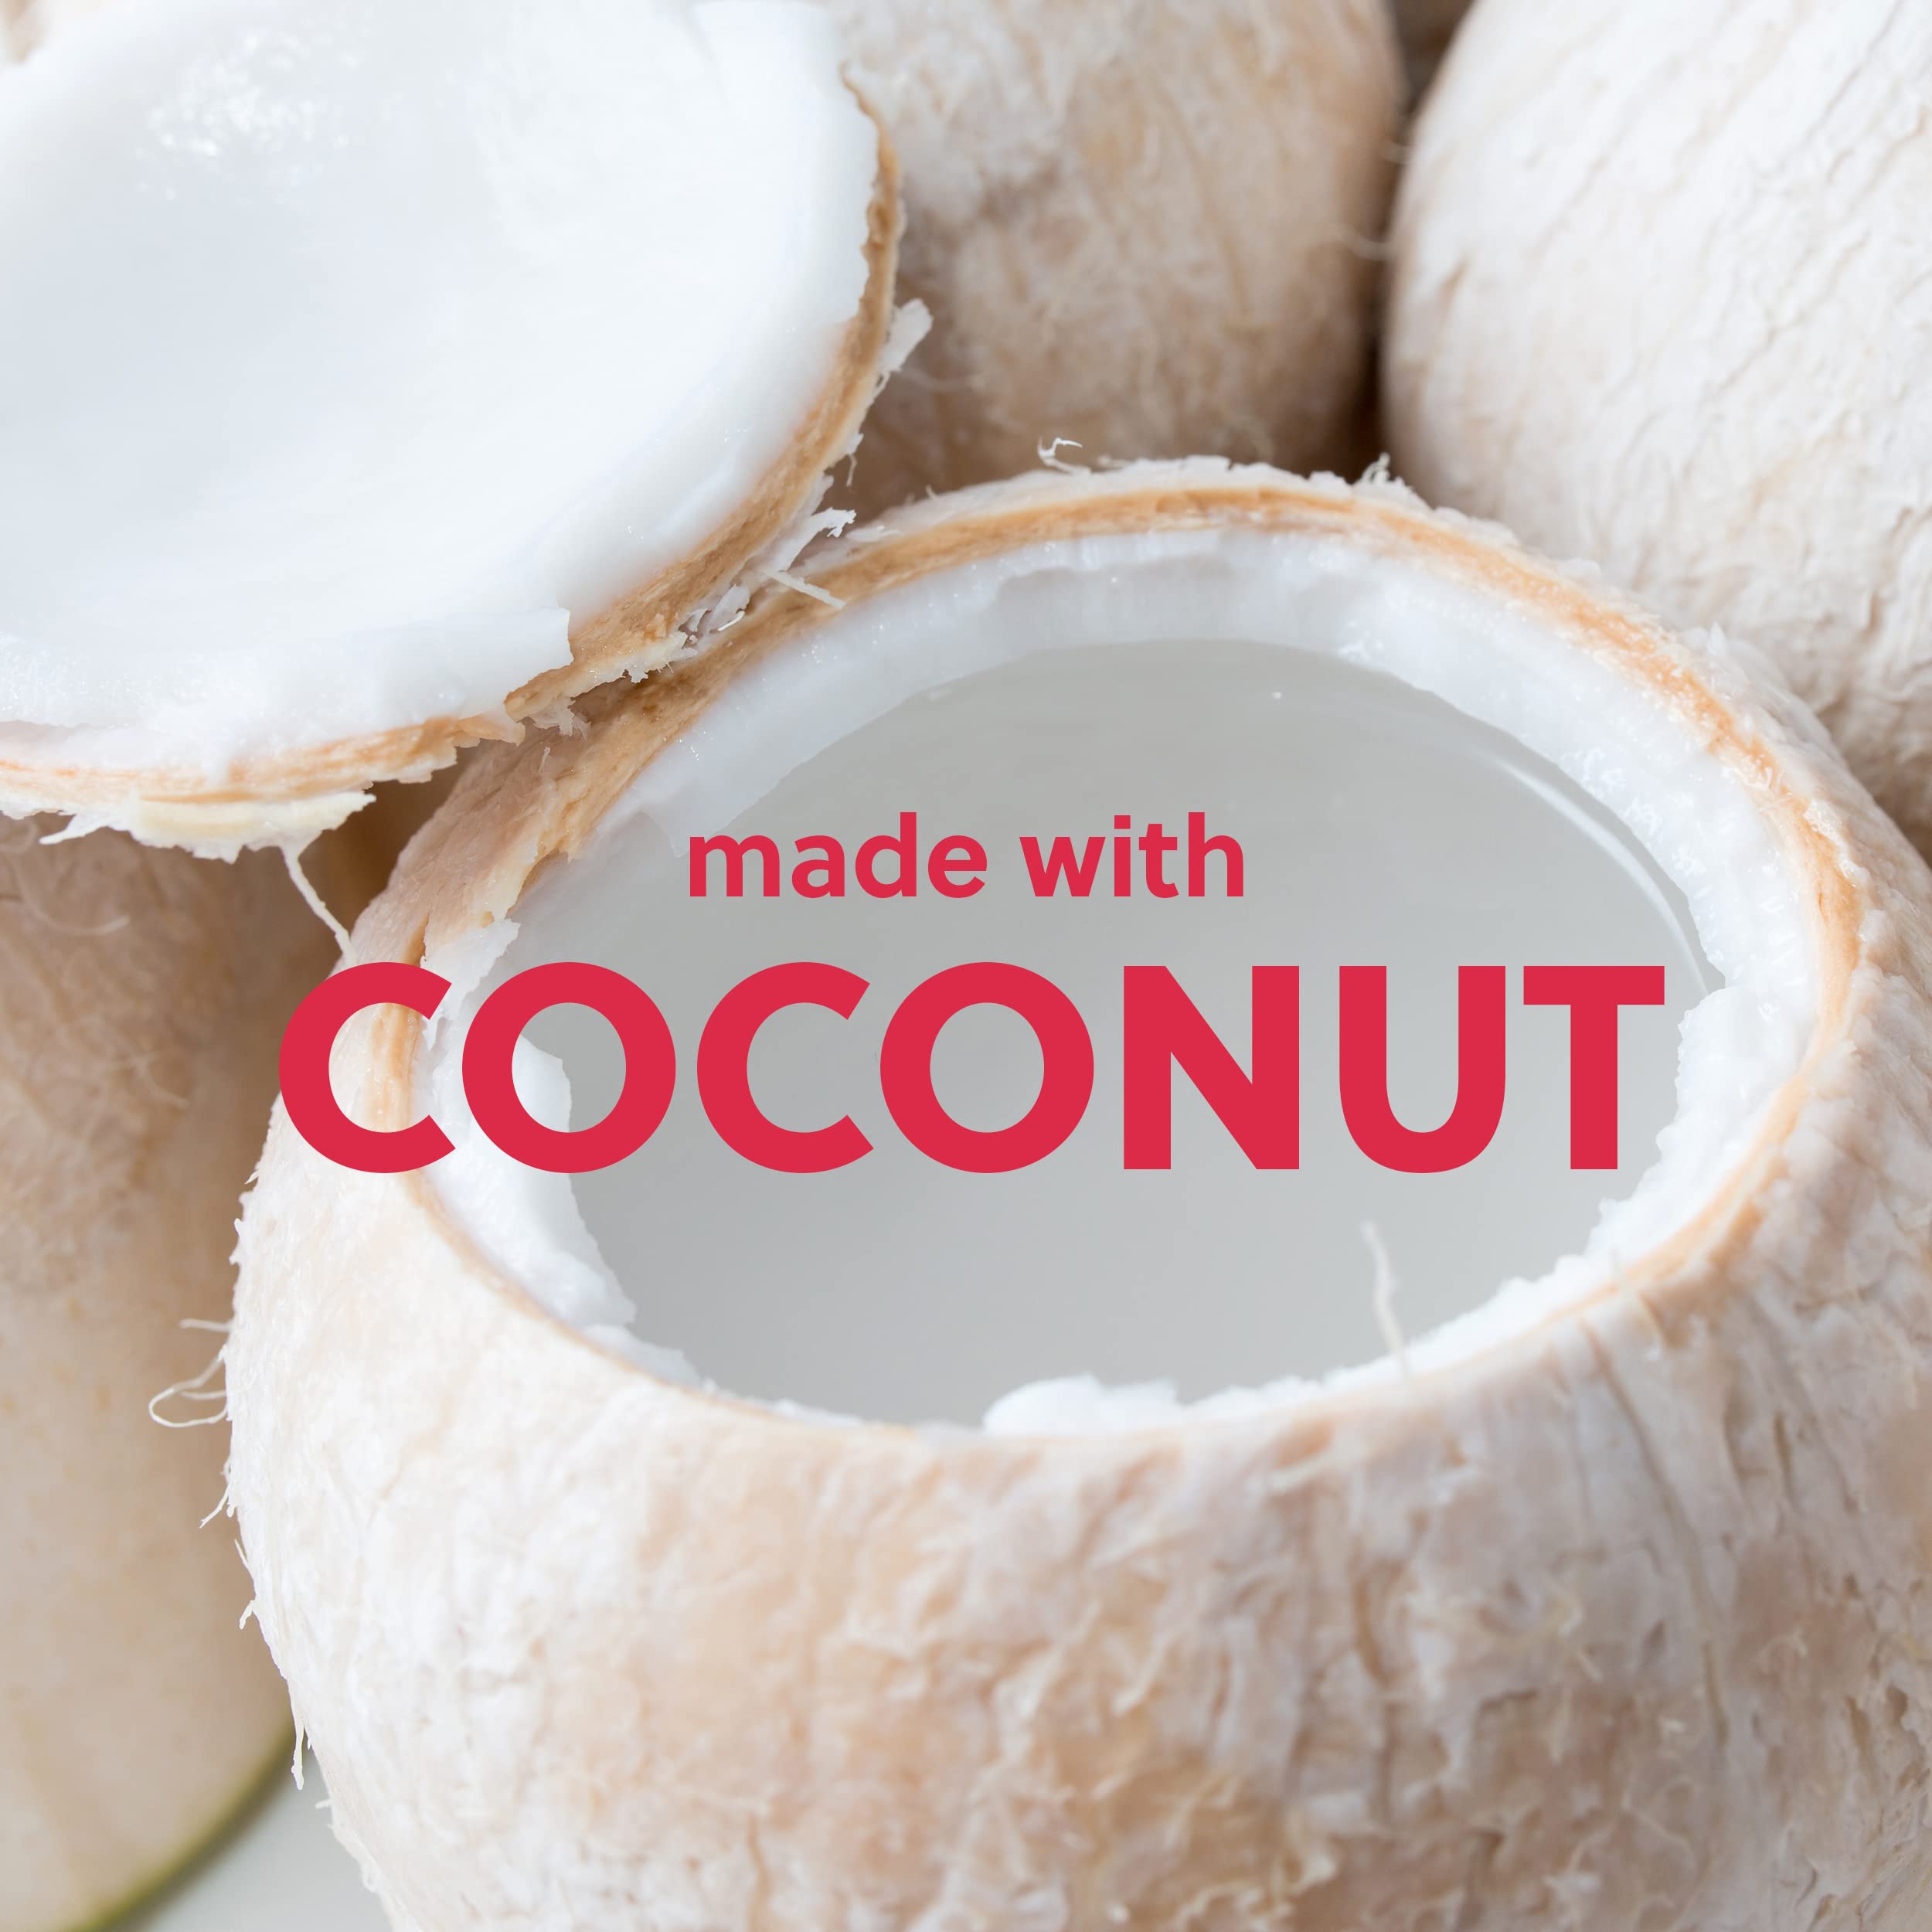 Tree Hut Coco Colada Whipped Shea Body Butter, 8.4oz, with Natural Shea Butter for Nourishing Essential Body Care